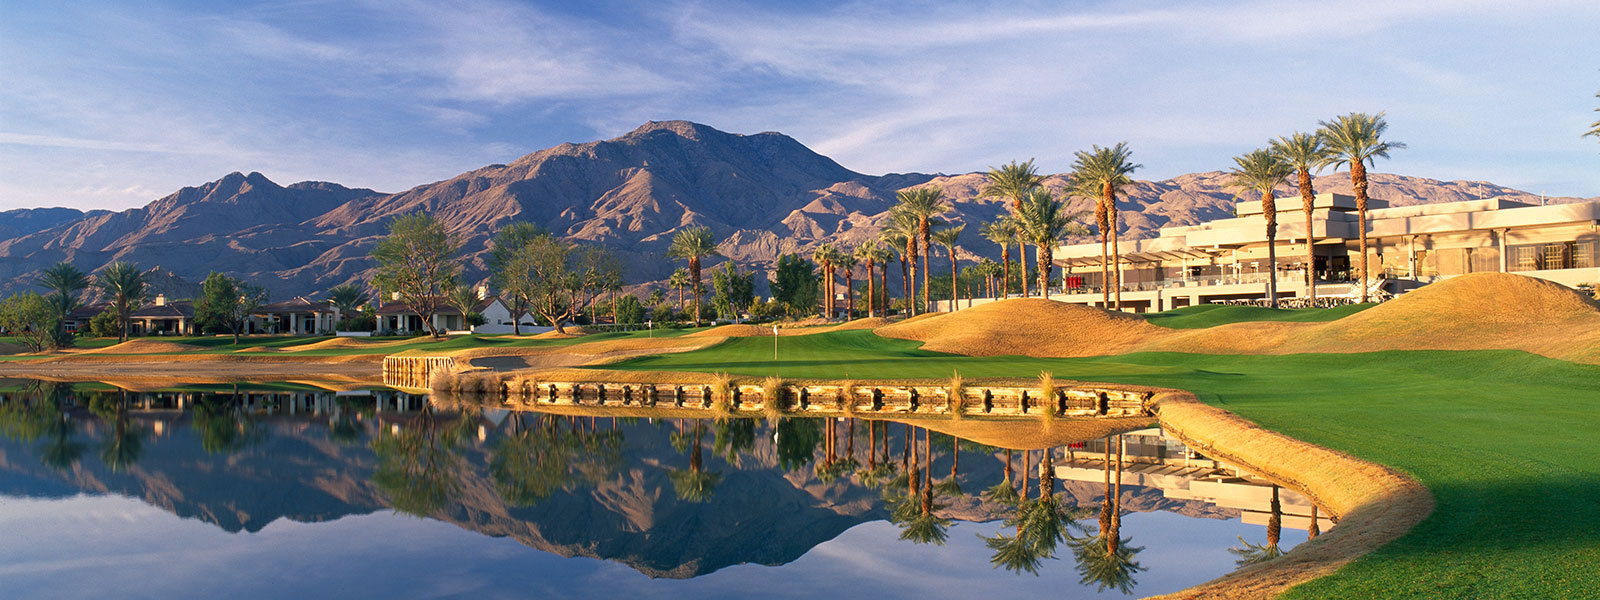 Palm Springs Area Golf Courses & Resorts